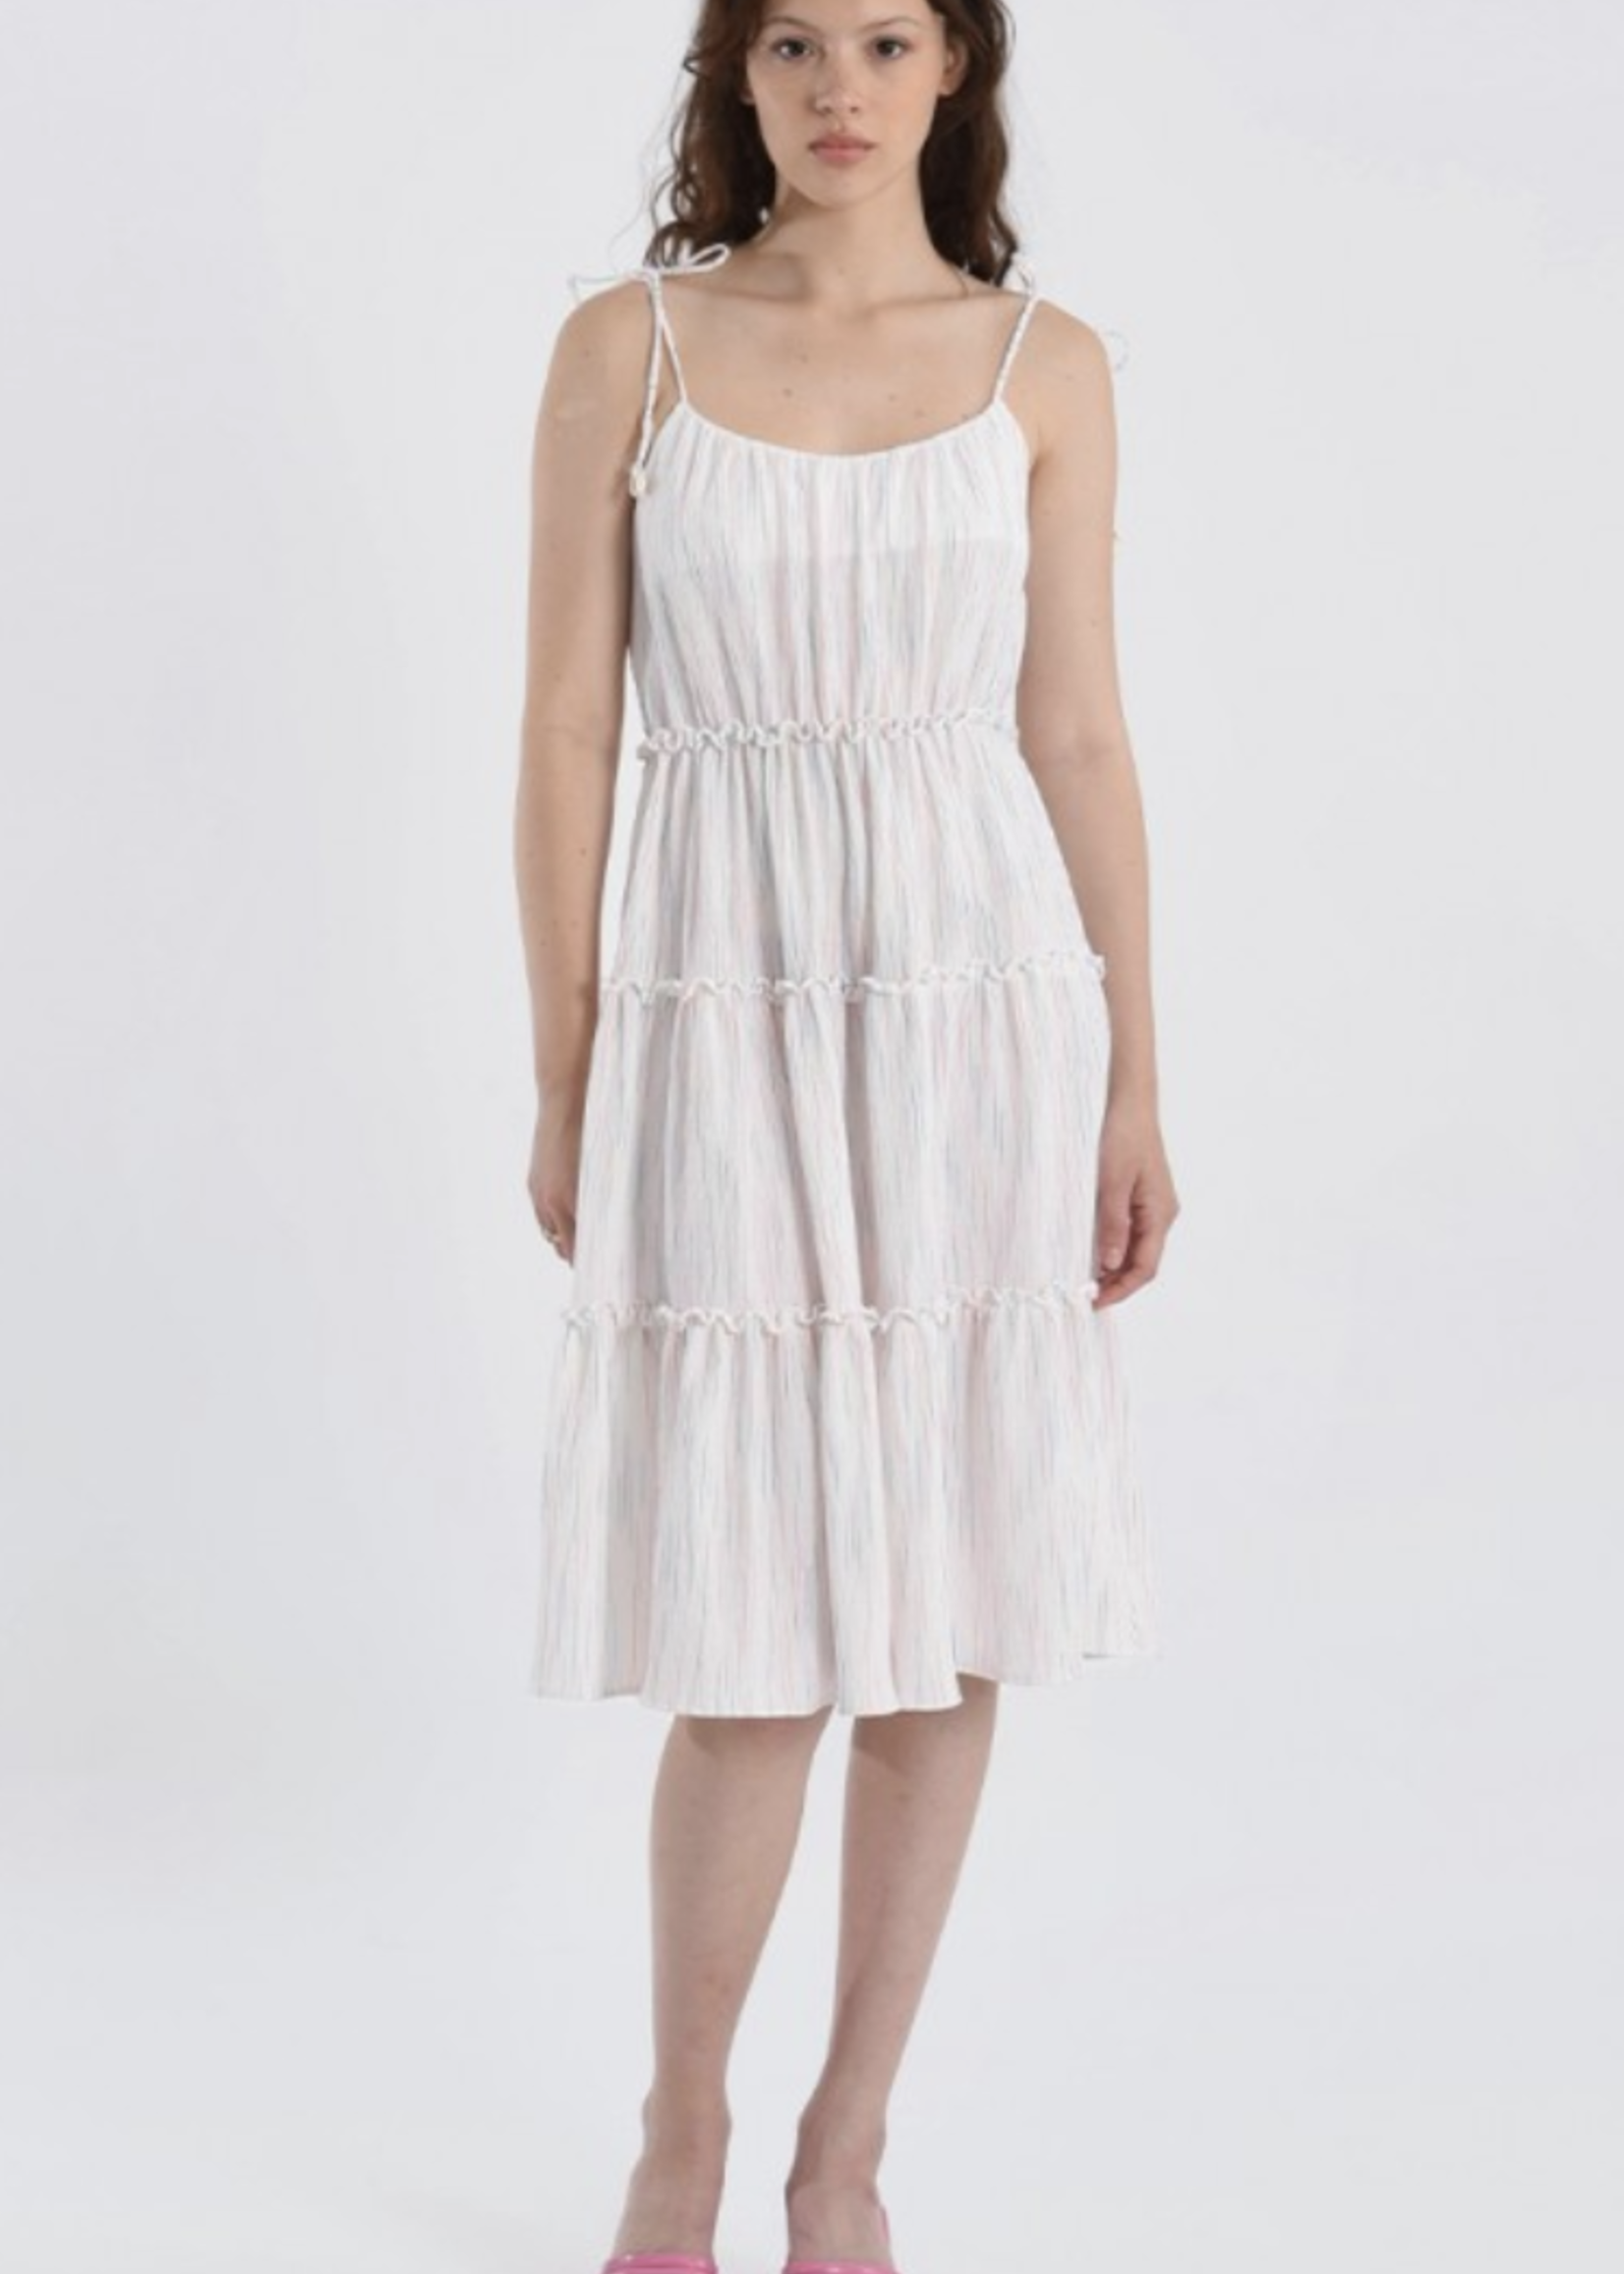 MOLLY BRACKEN FIT AND FLARE EMBOSSED DRESS